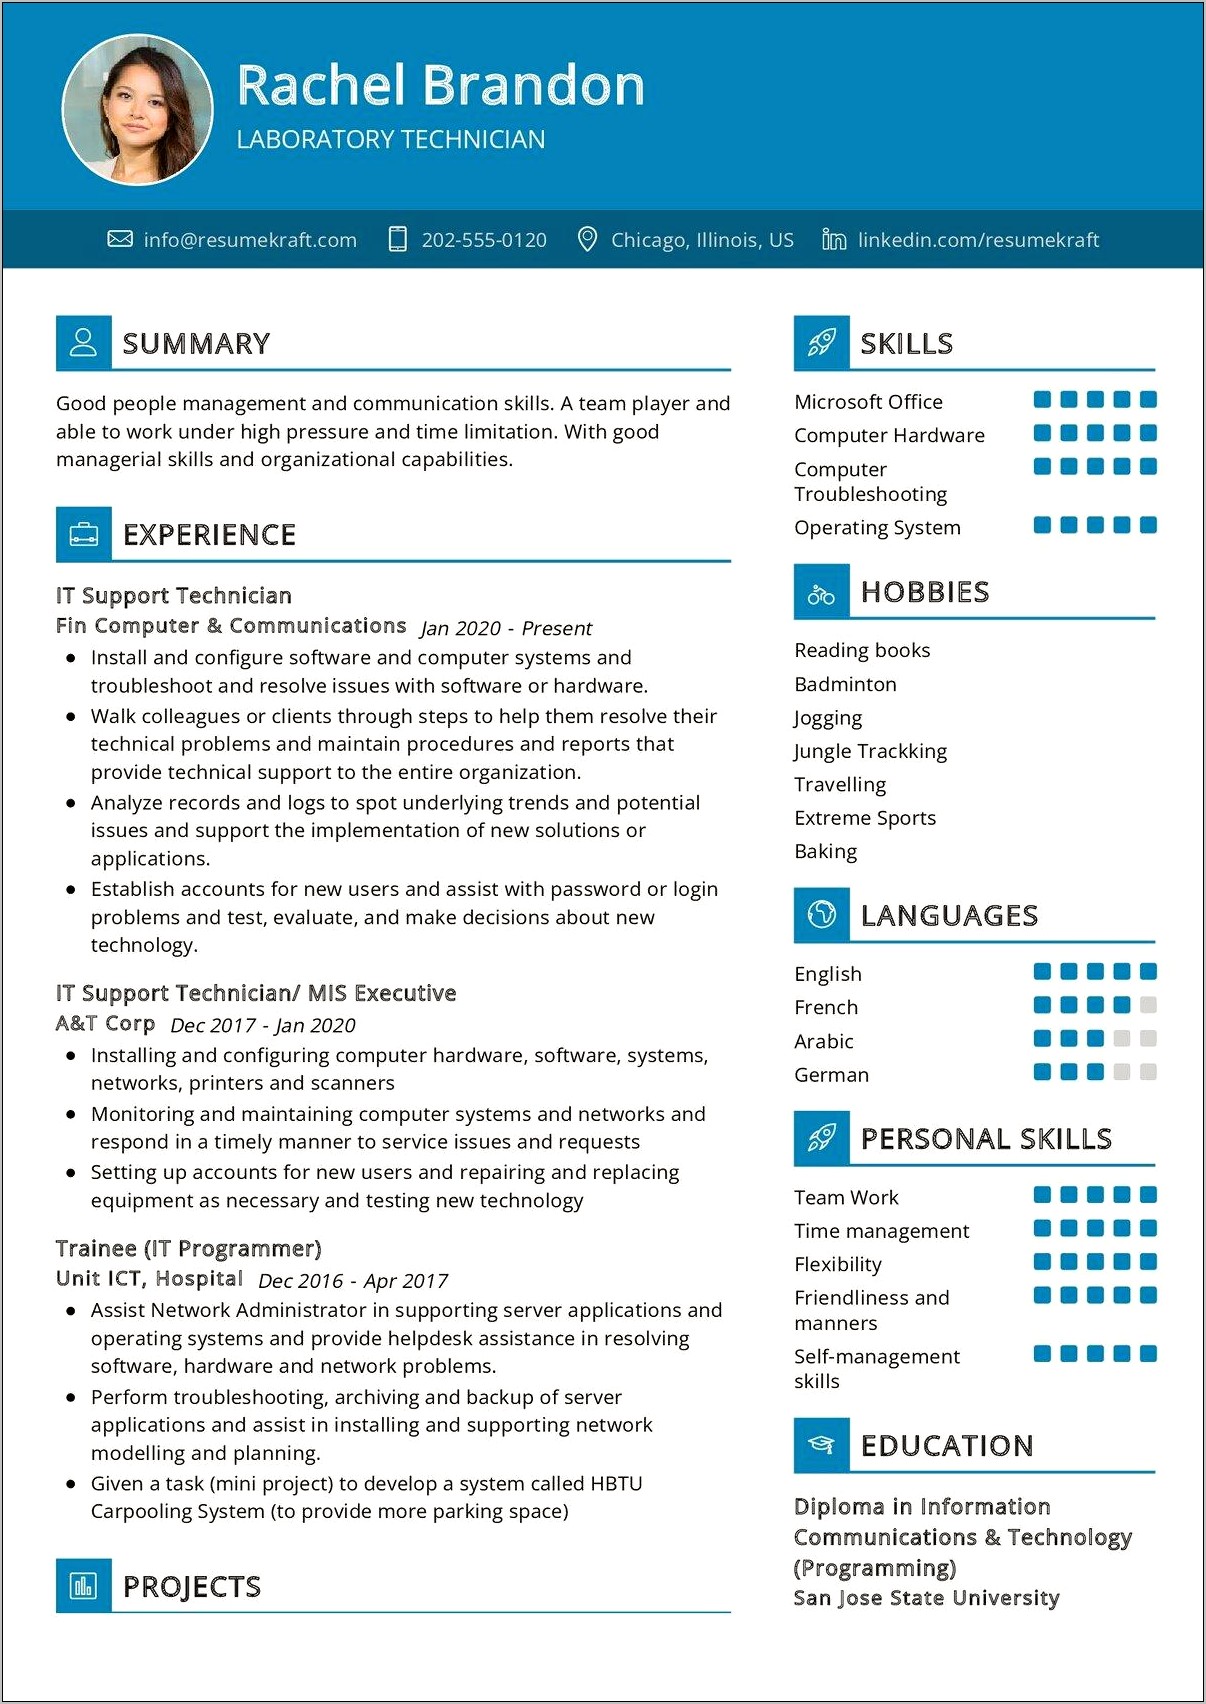 Resume Examples For Laboratory Technicians